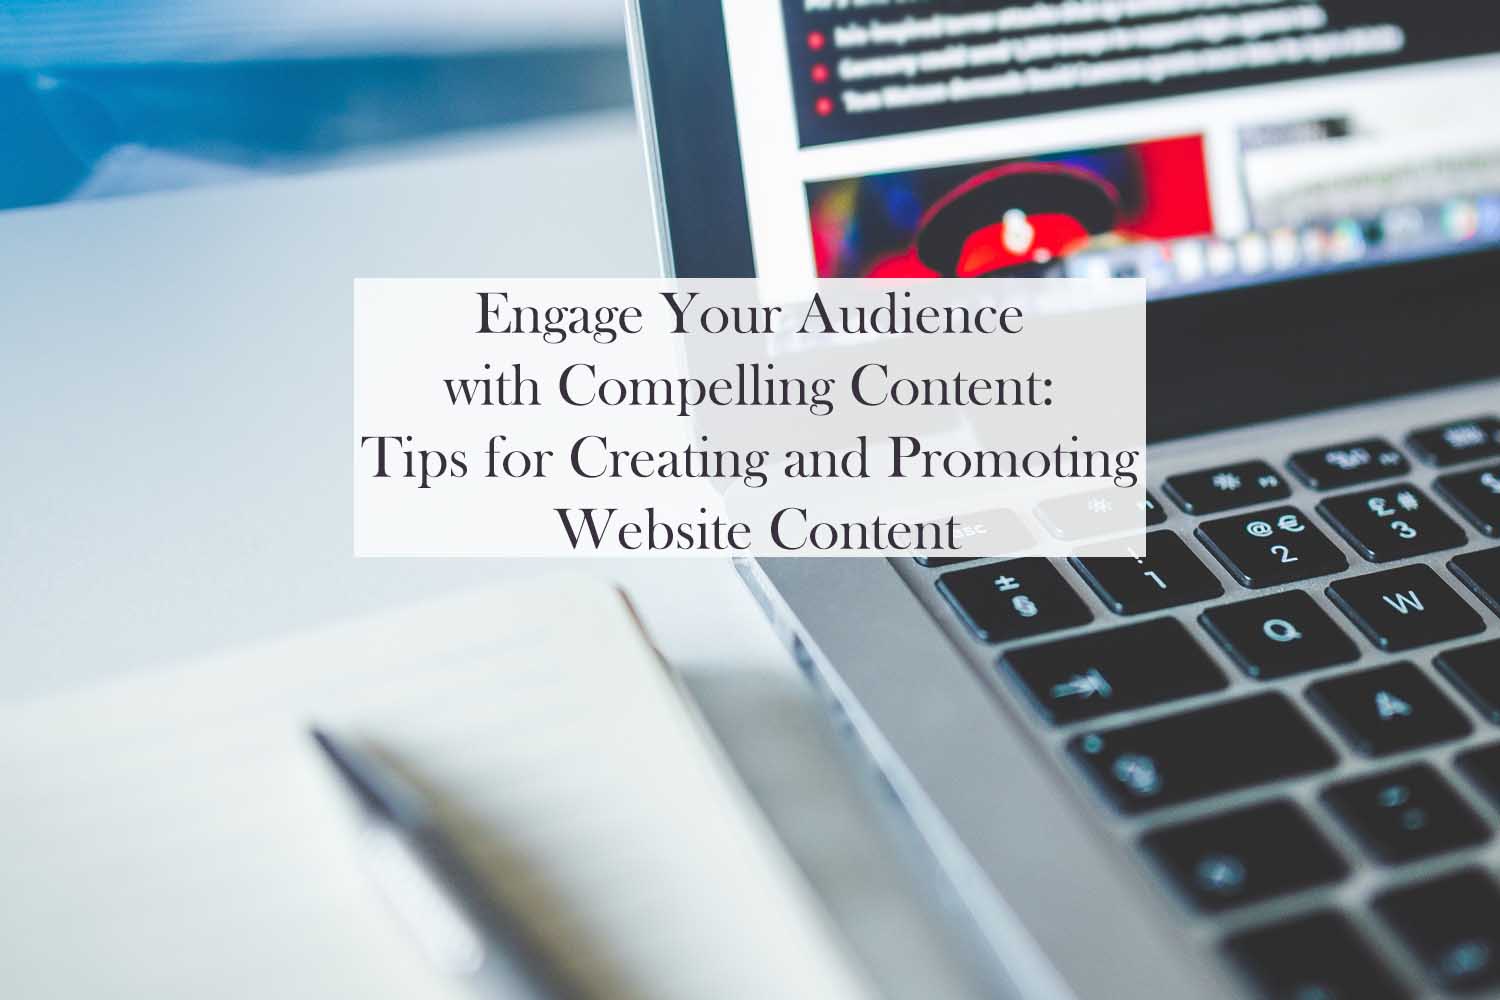 Engage Your Audience with Compelling Content Tips for Creating and Promoting Website Content